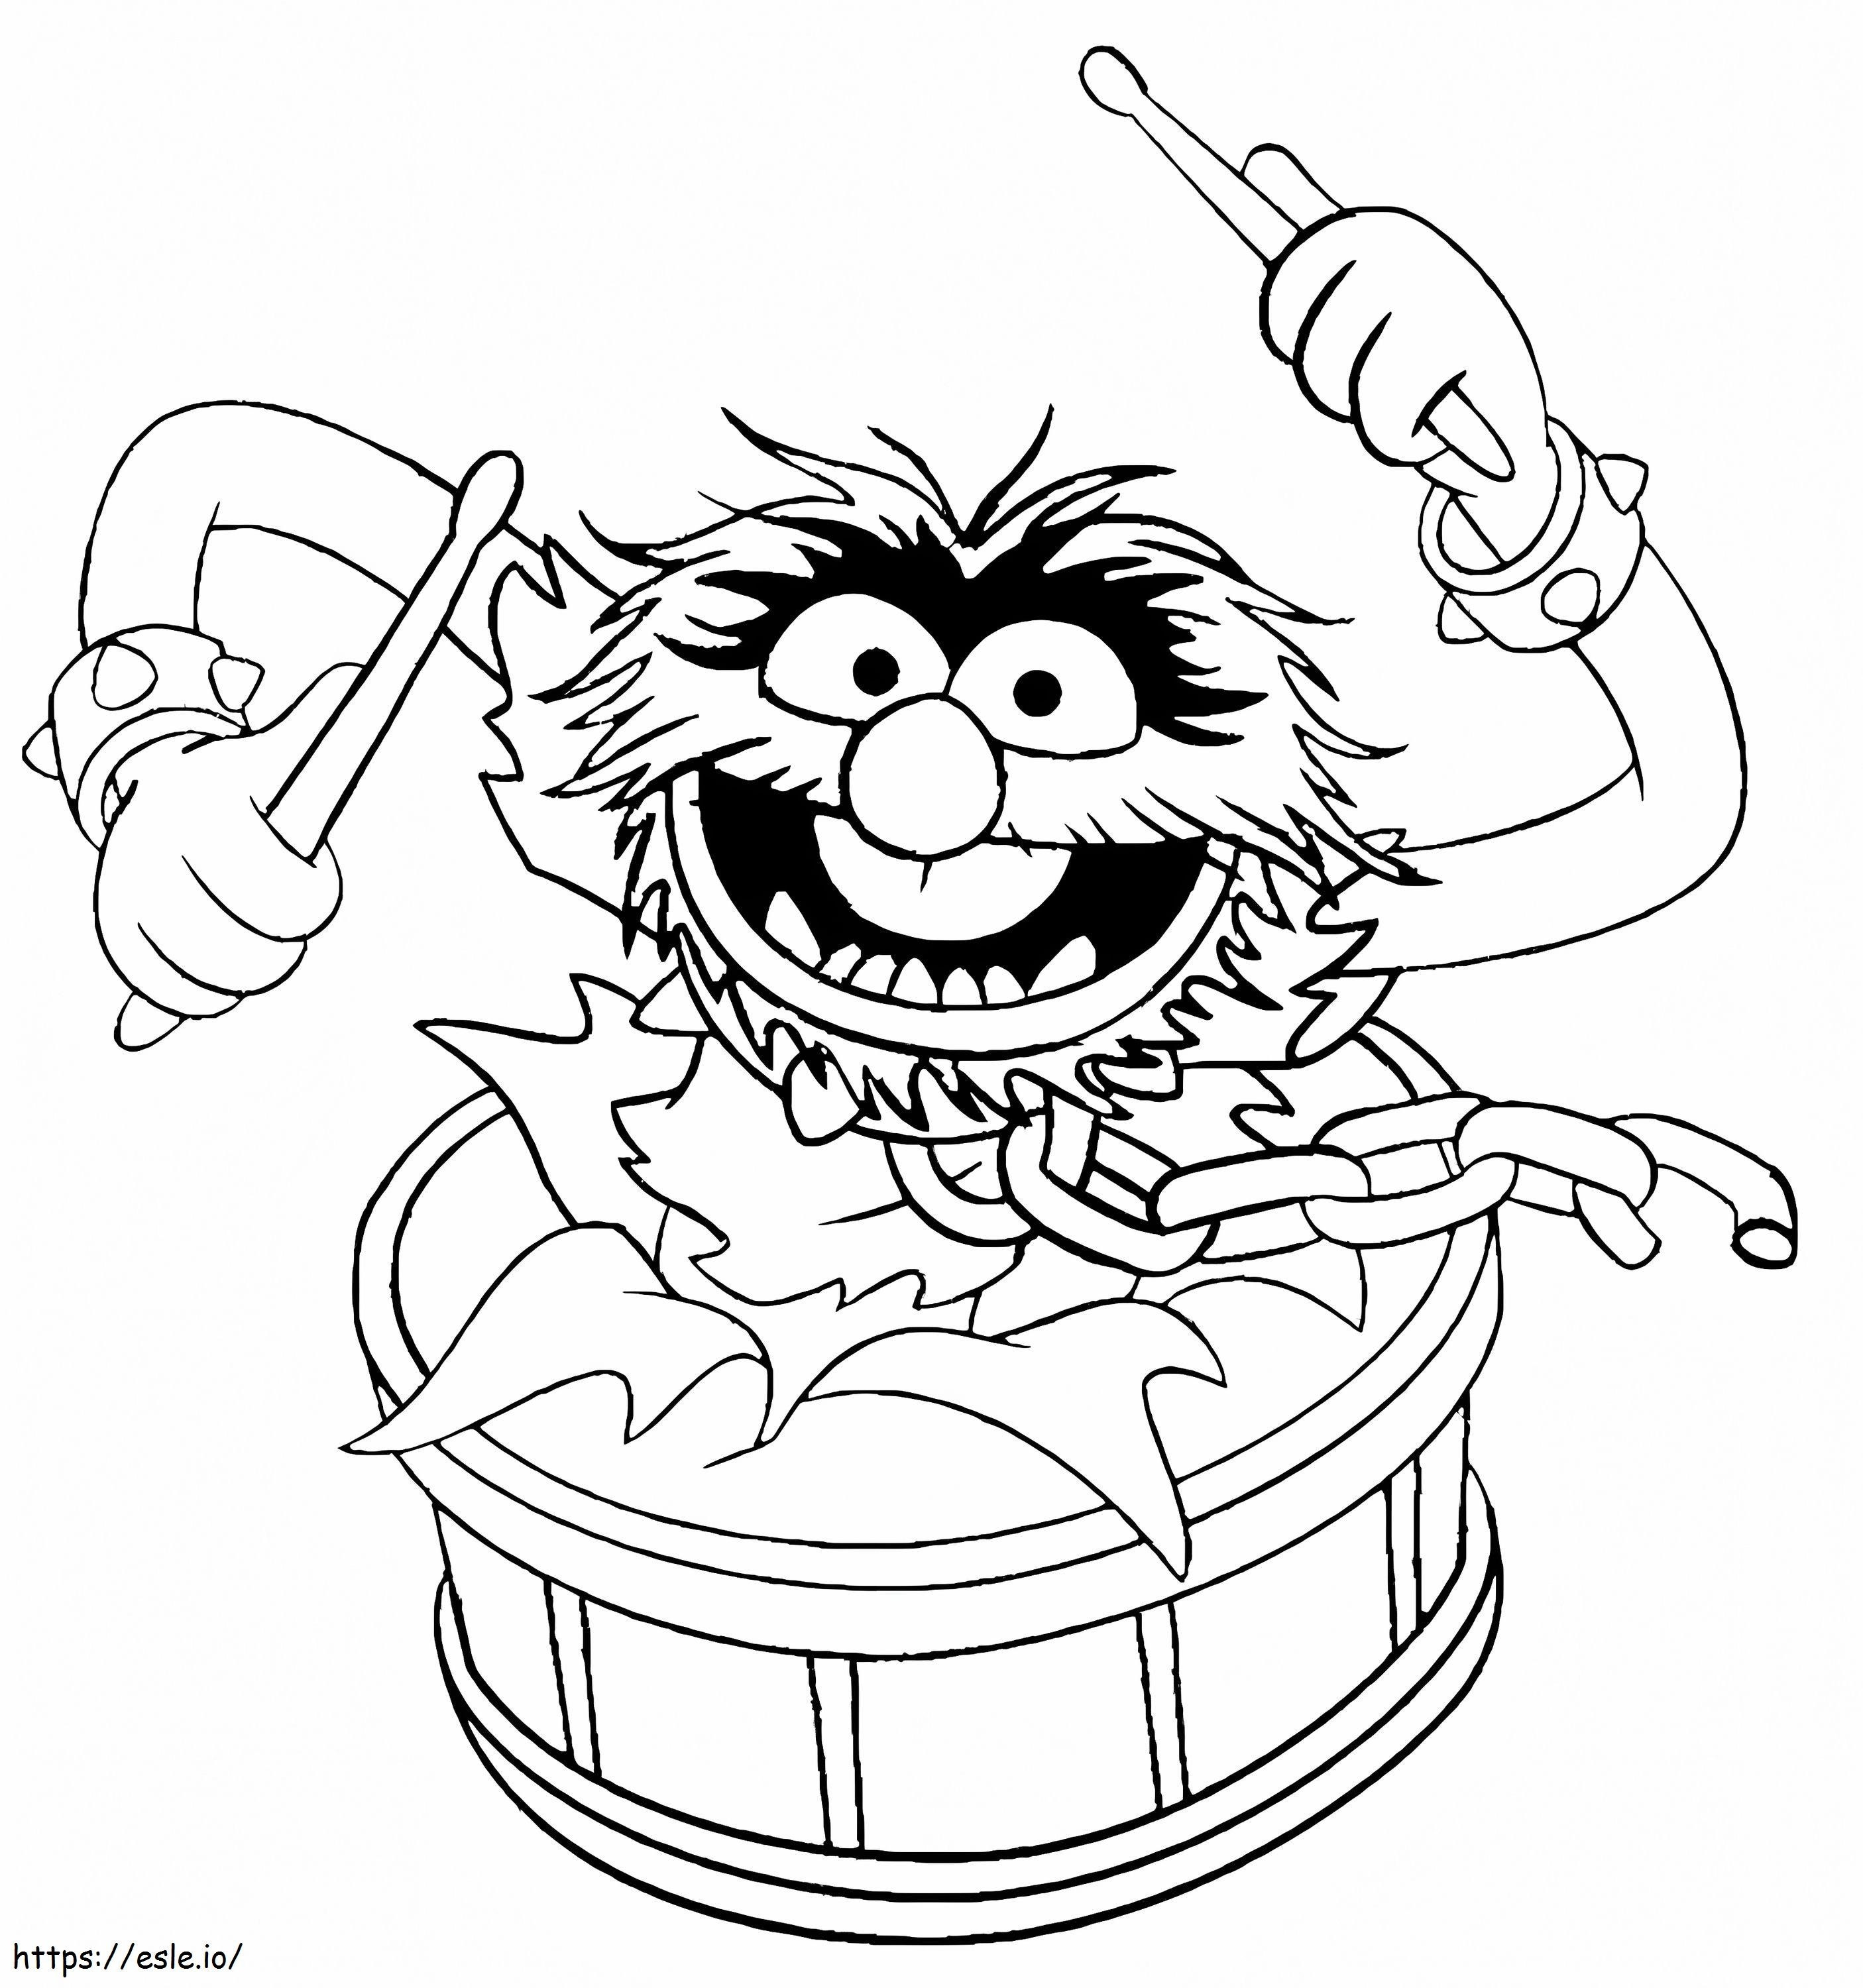 Animal From Muppets coloring page